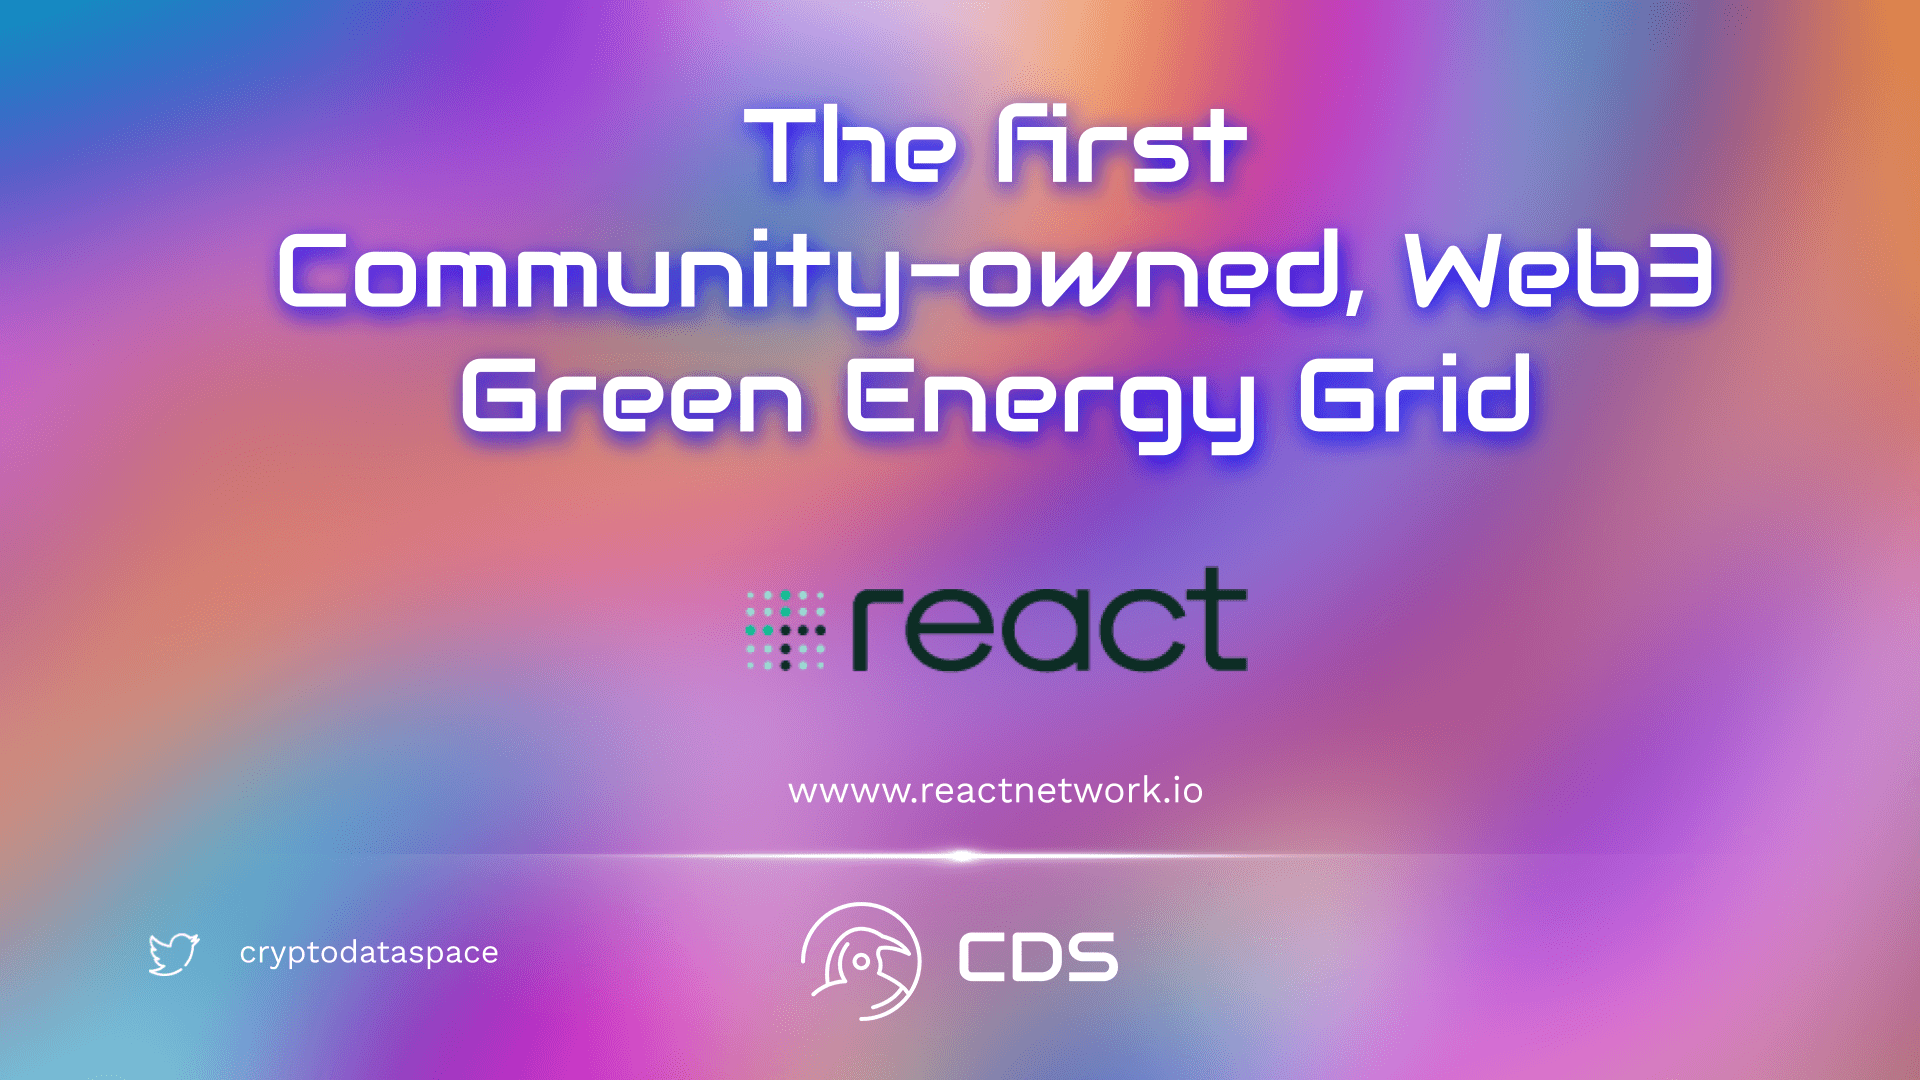 The first Community-owned, Web3 Green Energy Grid